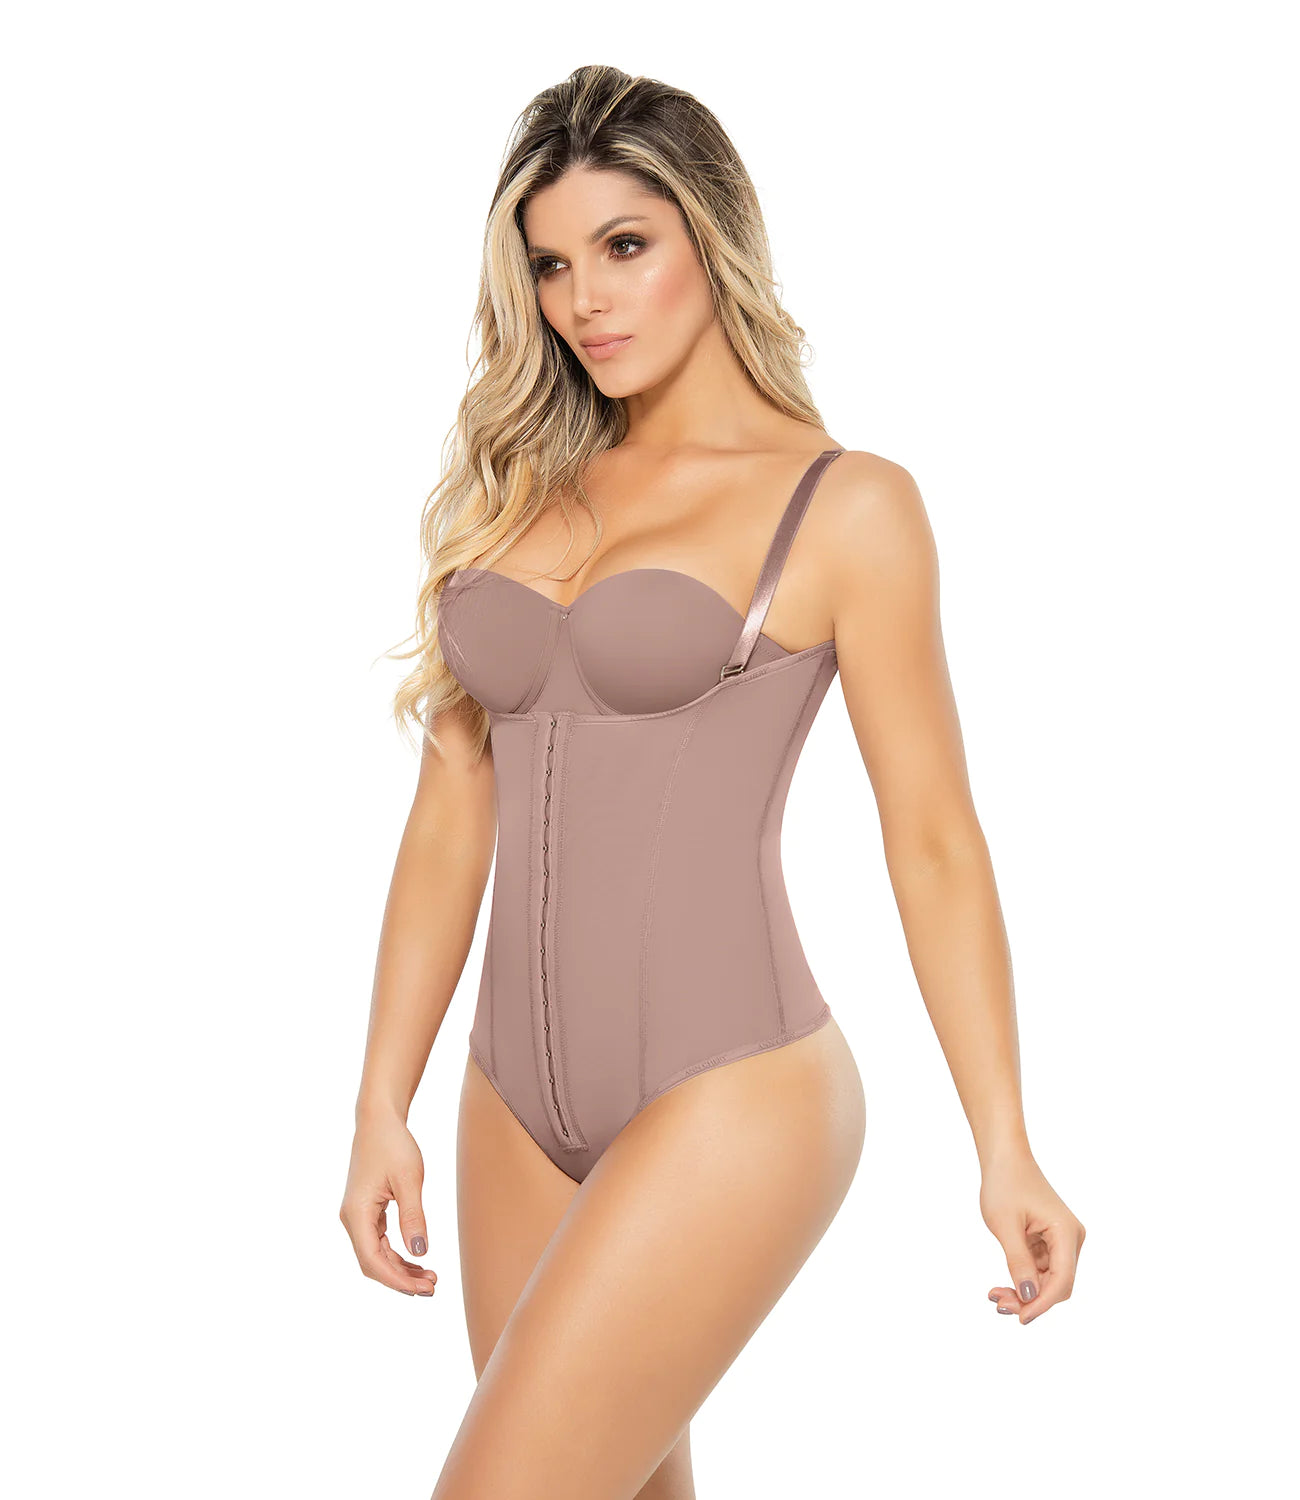 Ann Chery 5149 Tanga Bodysuit Shapewear for Women, Comfort Line Medium  Compression, Post Surgical, Daily Use